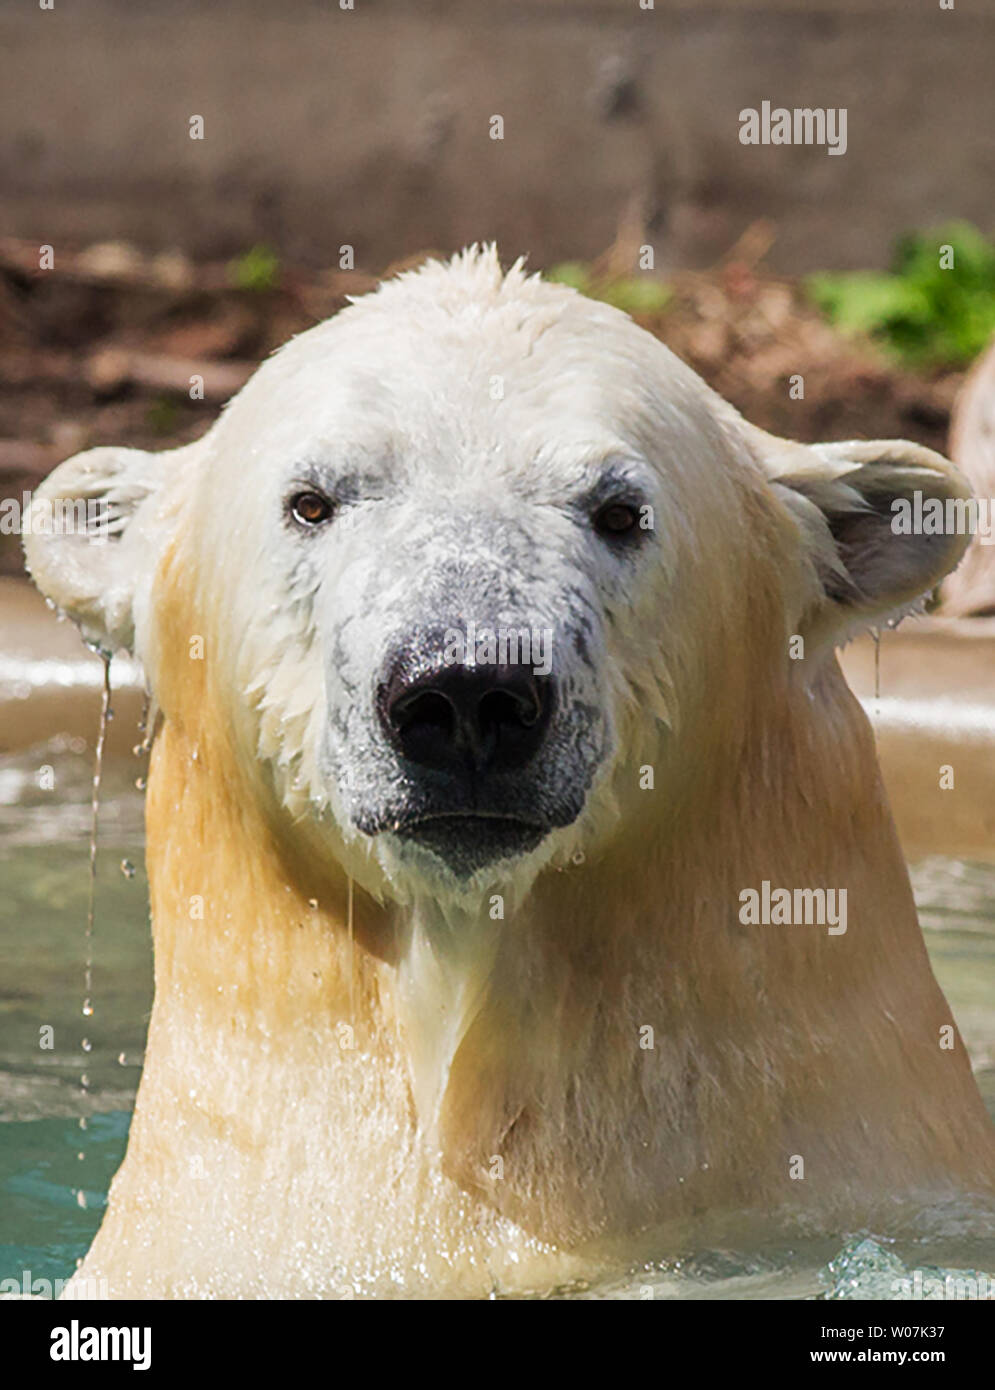 The Saint Louis Zoo has announced that Kali, a 2 ½-year-old, 850-pound male polar bear that was orphaned in Alaska as a cub, is now being housed in his new 40,000-square-foot habitat at the Zoo in St. Louis on May 9, 2015. Kali’s transportation on May 5 from Rochester, New York, to St. Louis was donated by FedEx. The Saint Louis Zoo’s veterinarian and animal care staff accompanied him on the day-long journey, which included a FedEx Express flight from Rochester to Memphis, and a temperature-controlled truck transport via FedEx Custom Critical from Memphis to St. Louis. Photo by Buffalo Zoo/UPI Stock Photo